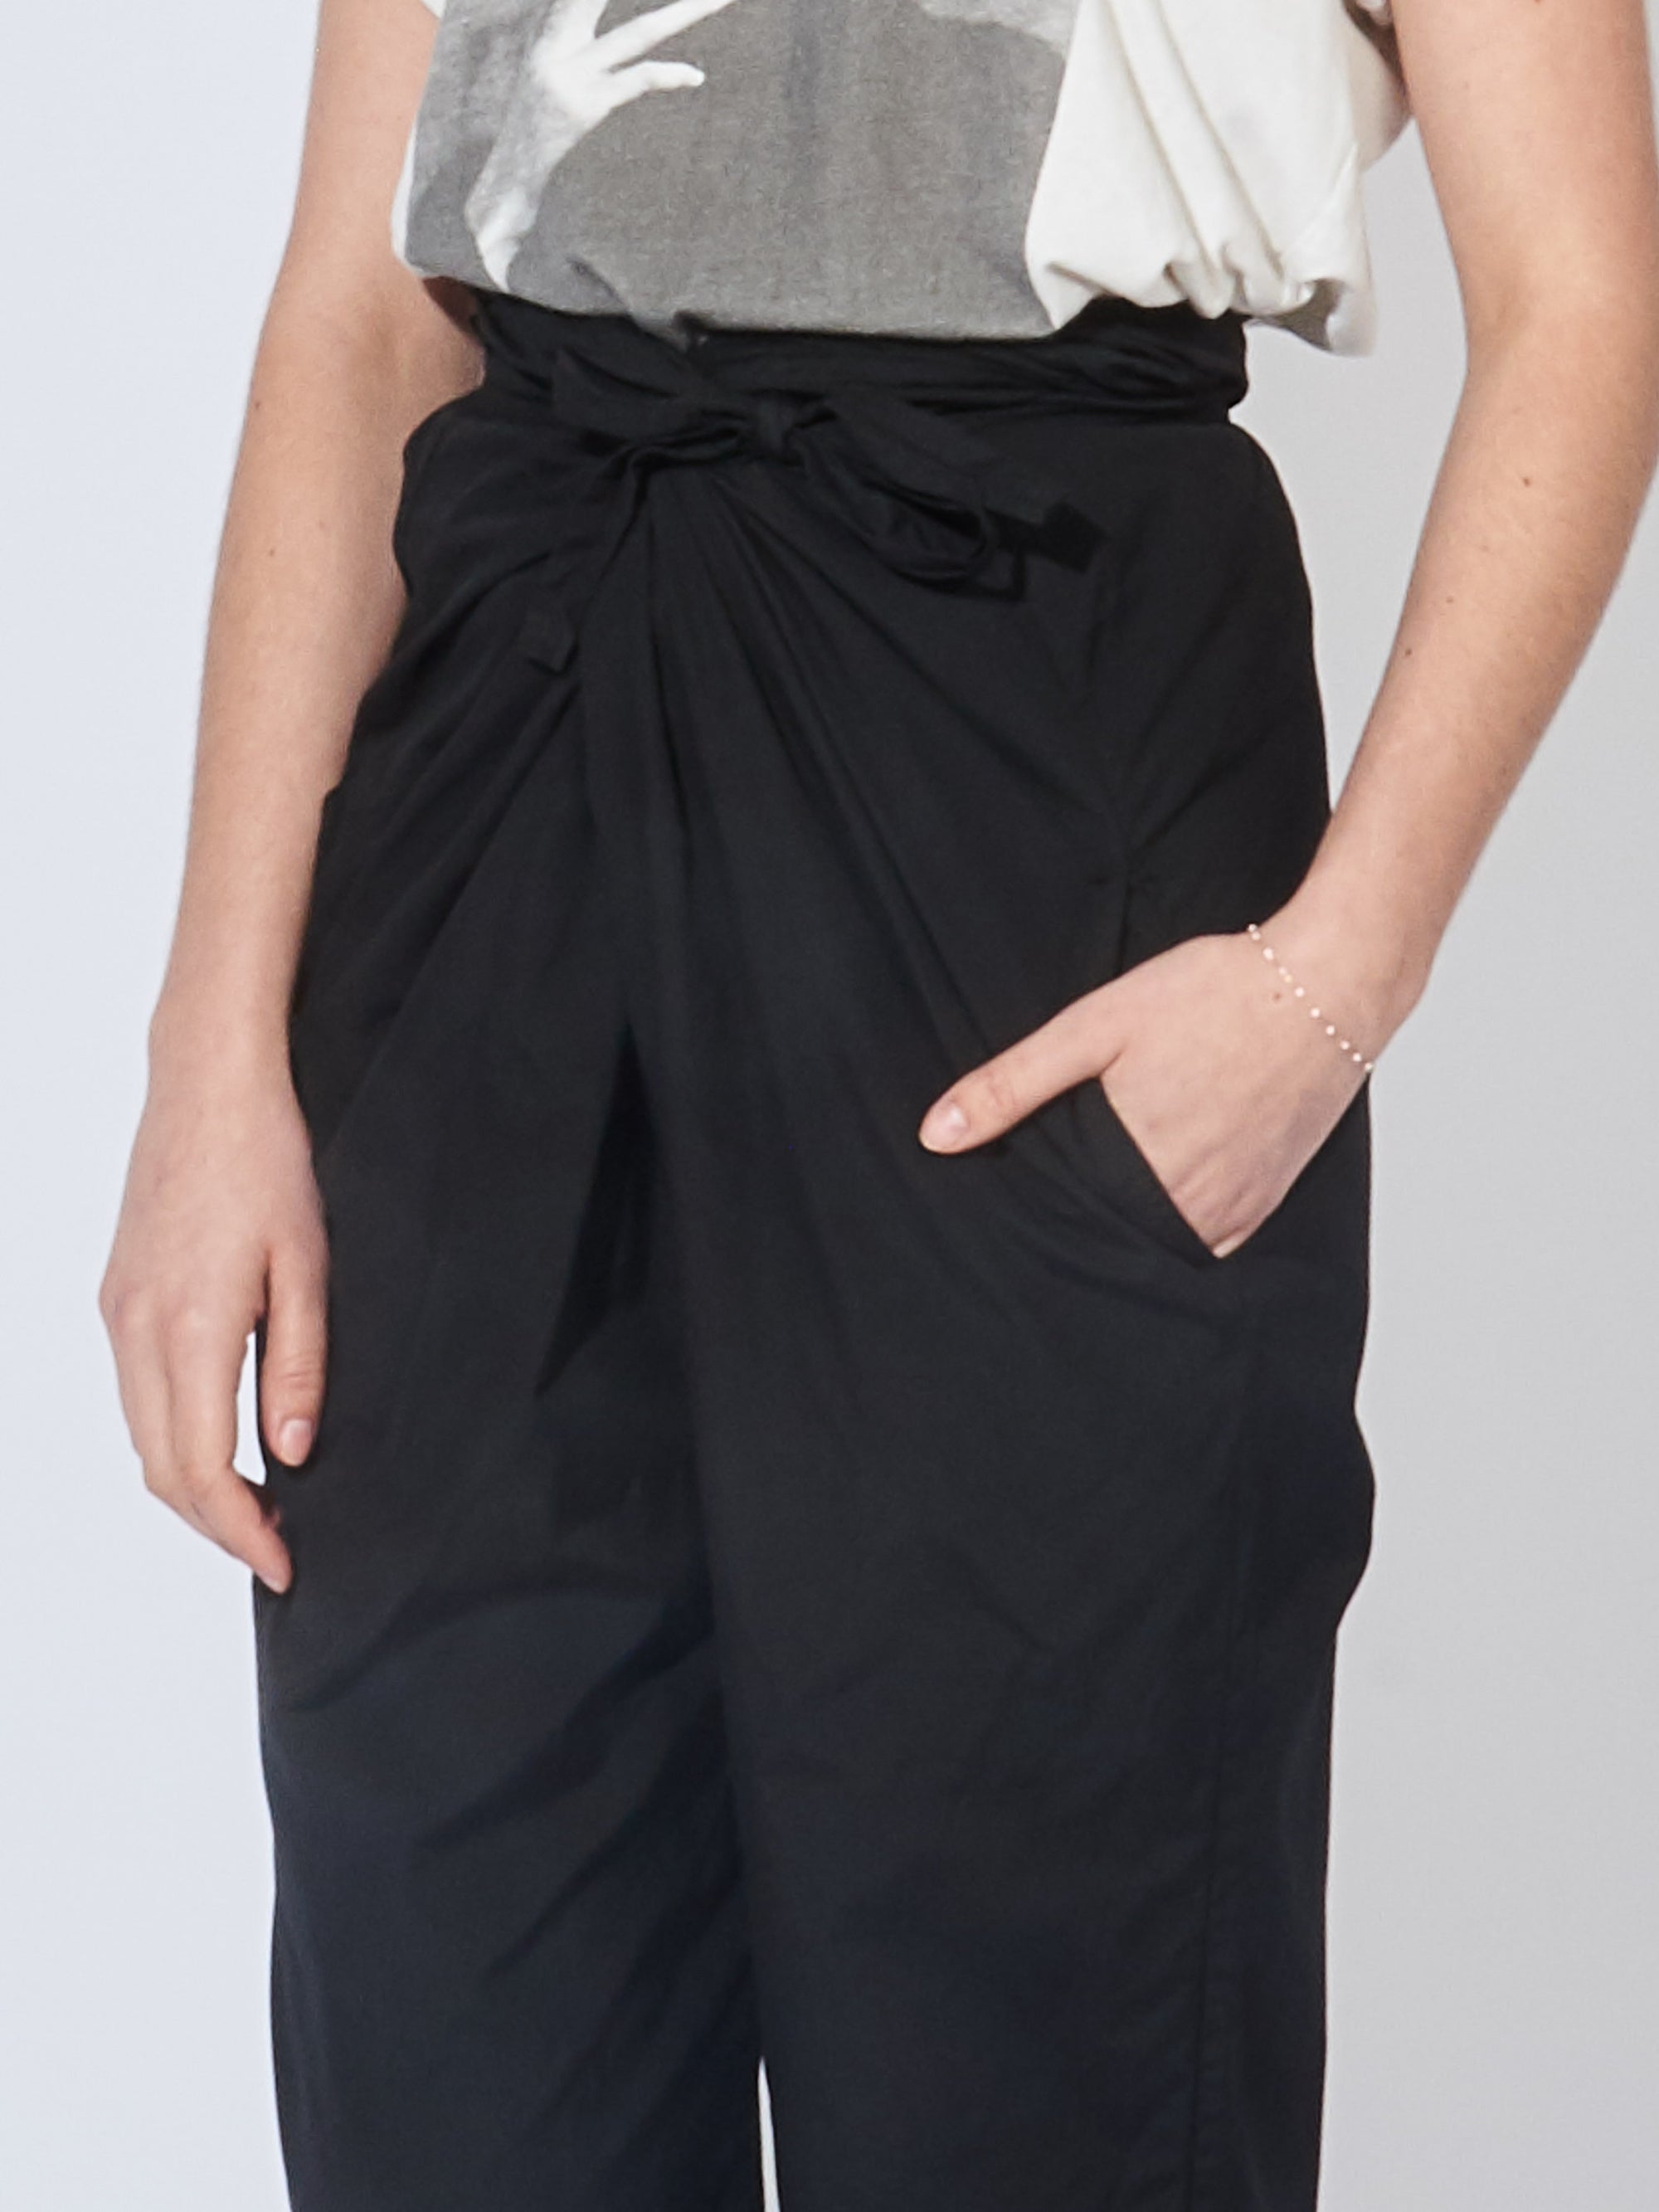 Cosmic Wonder - Black Suvin Cotton Broadcloth Wrapped Pants – Frances May